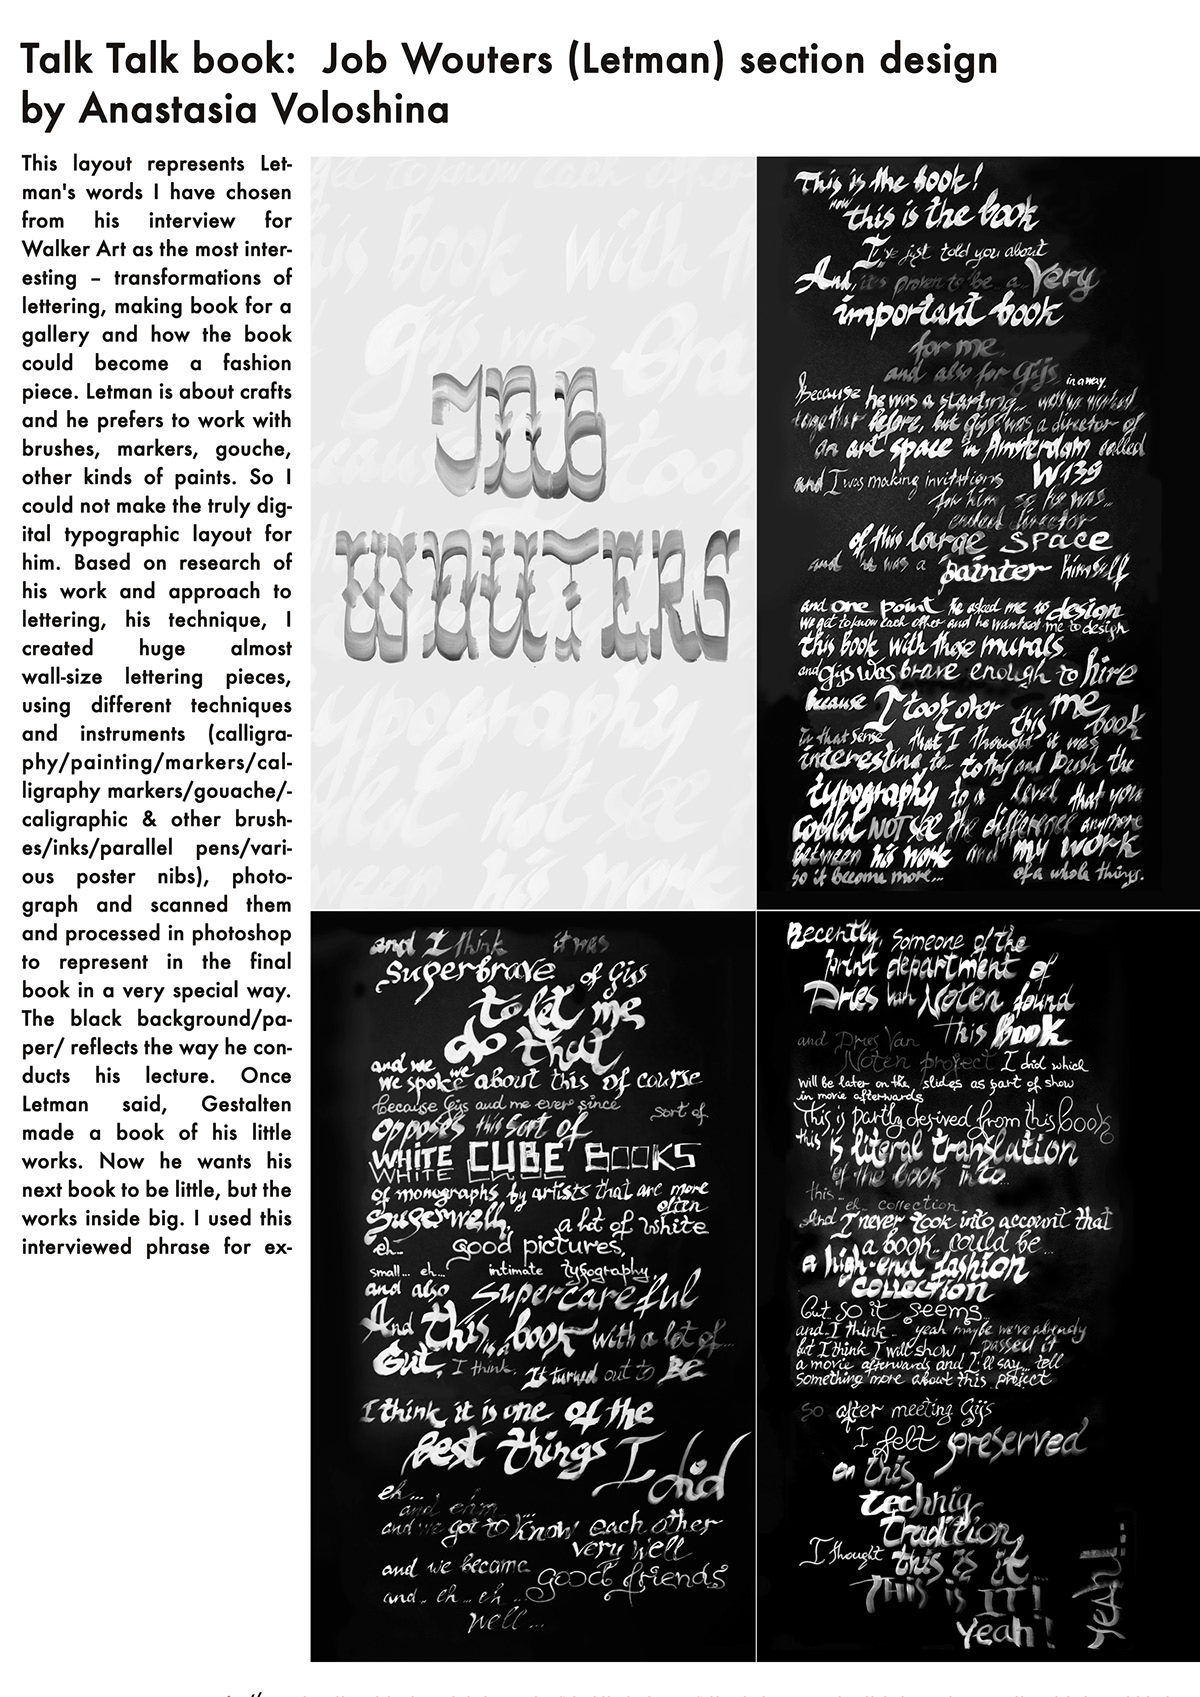 illustrative work lectures Interview Transcribing lettering